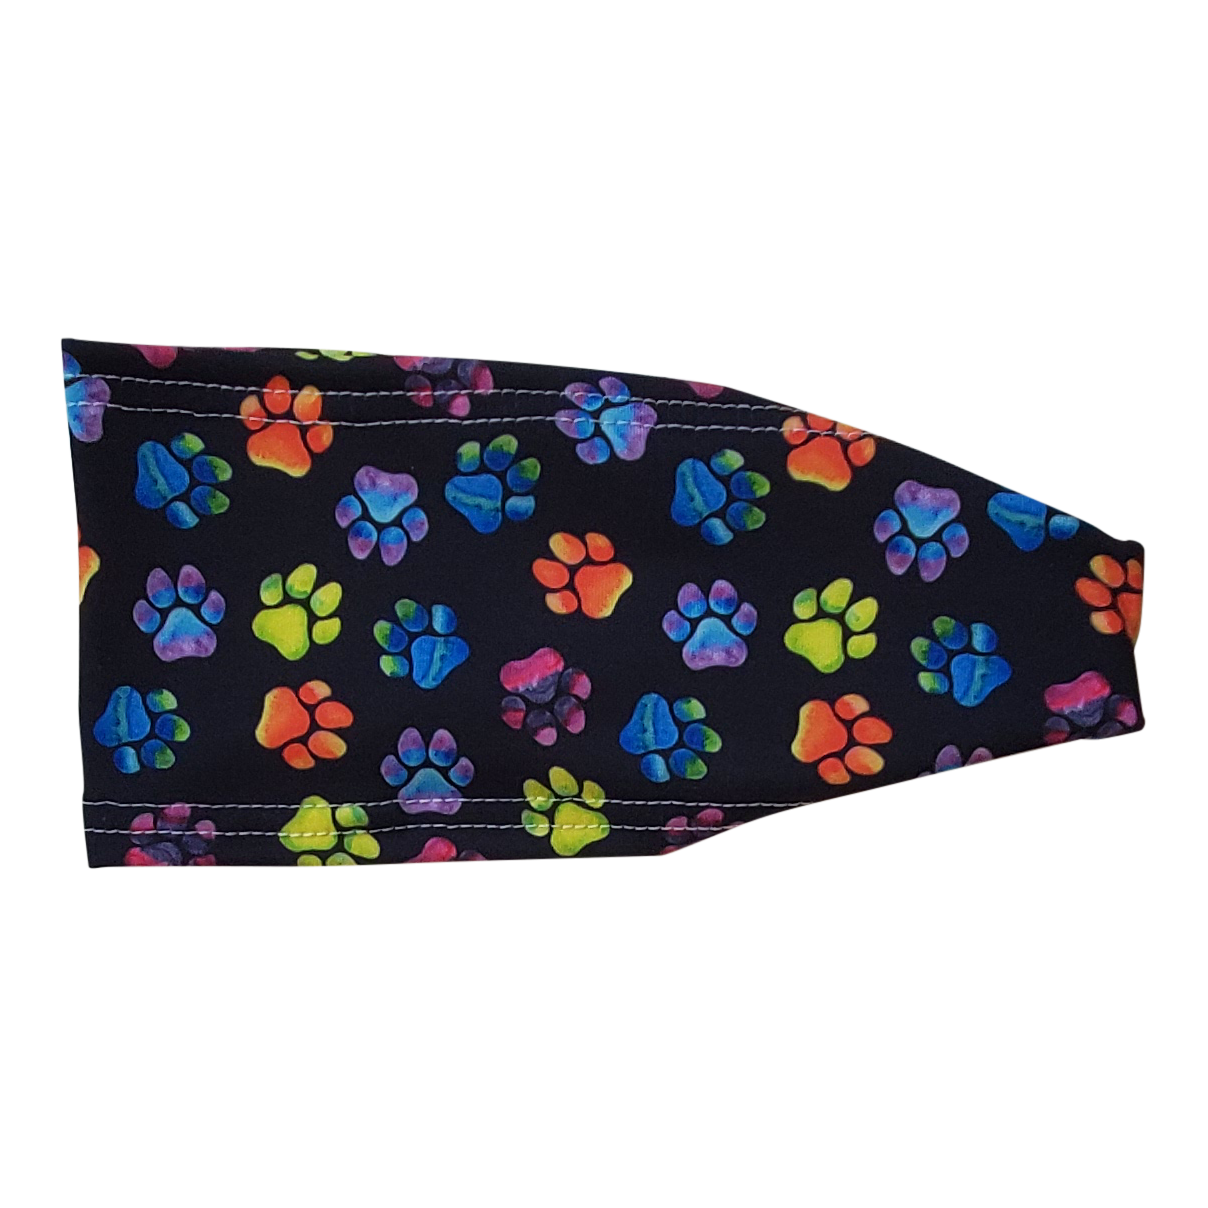 neon blue yellow and red paw prints on black